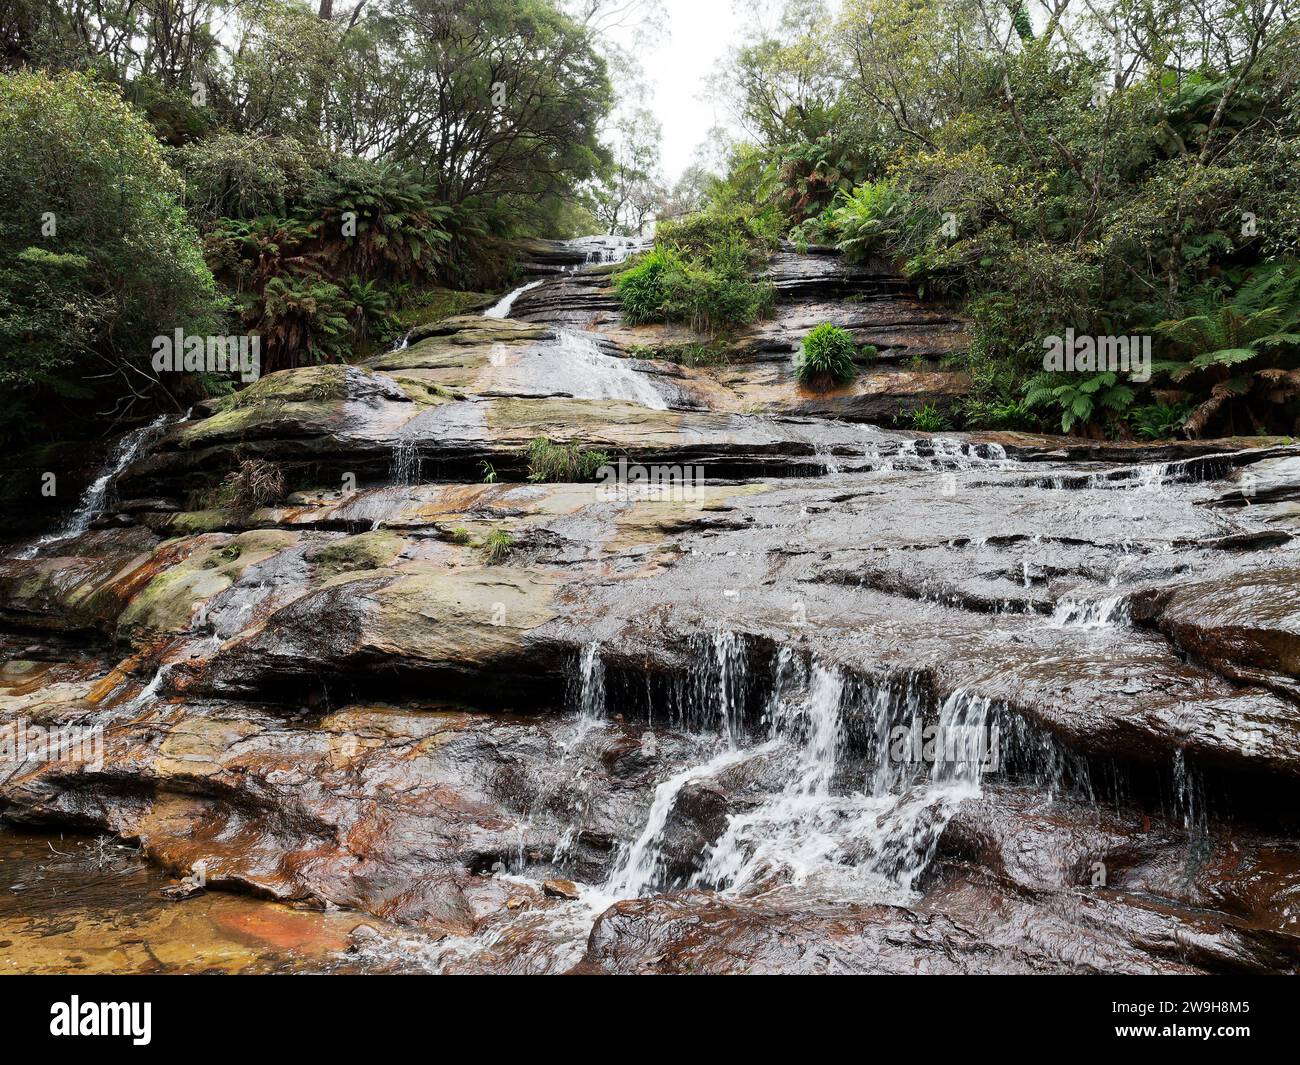 Low angle view looking up at the Katoomba Falls in the Blue Mountains near Sydney Australia Stock Photo